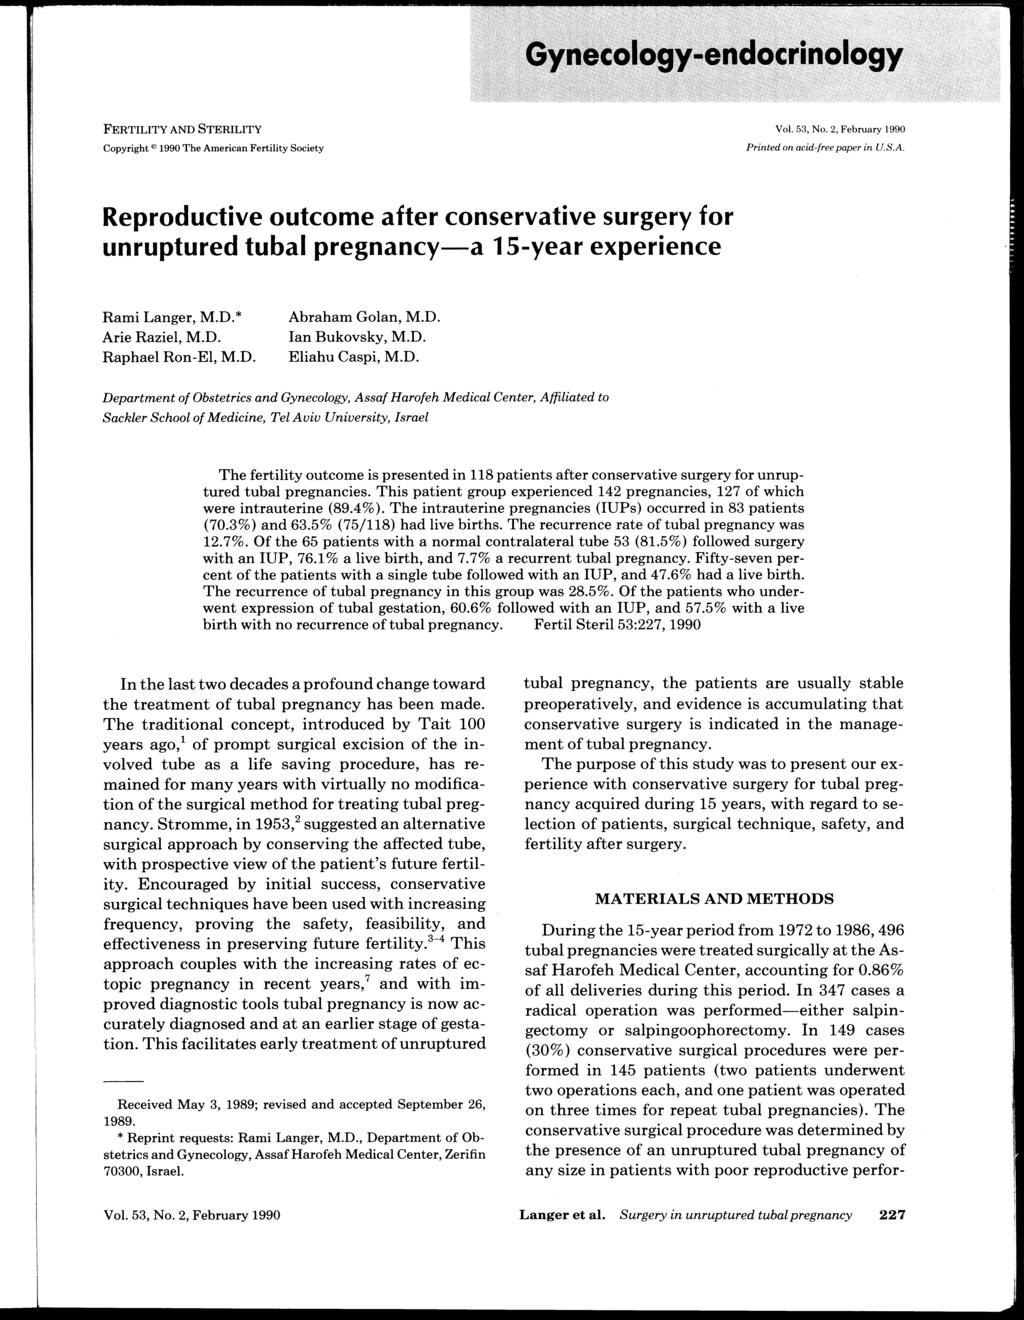 ... Gynecology-endocrinology FERTILITY AND STERILITY Copyright 1990 The American Fertility Society Vol. 5:1, No.2, February 1990 Printed on acid-free paper in U.S.A. Reproductive outcome after conservative surgery for unruptured tubal pregnancy-a 15-year experience Rami Langer, M.